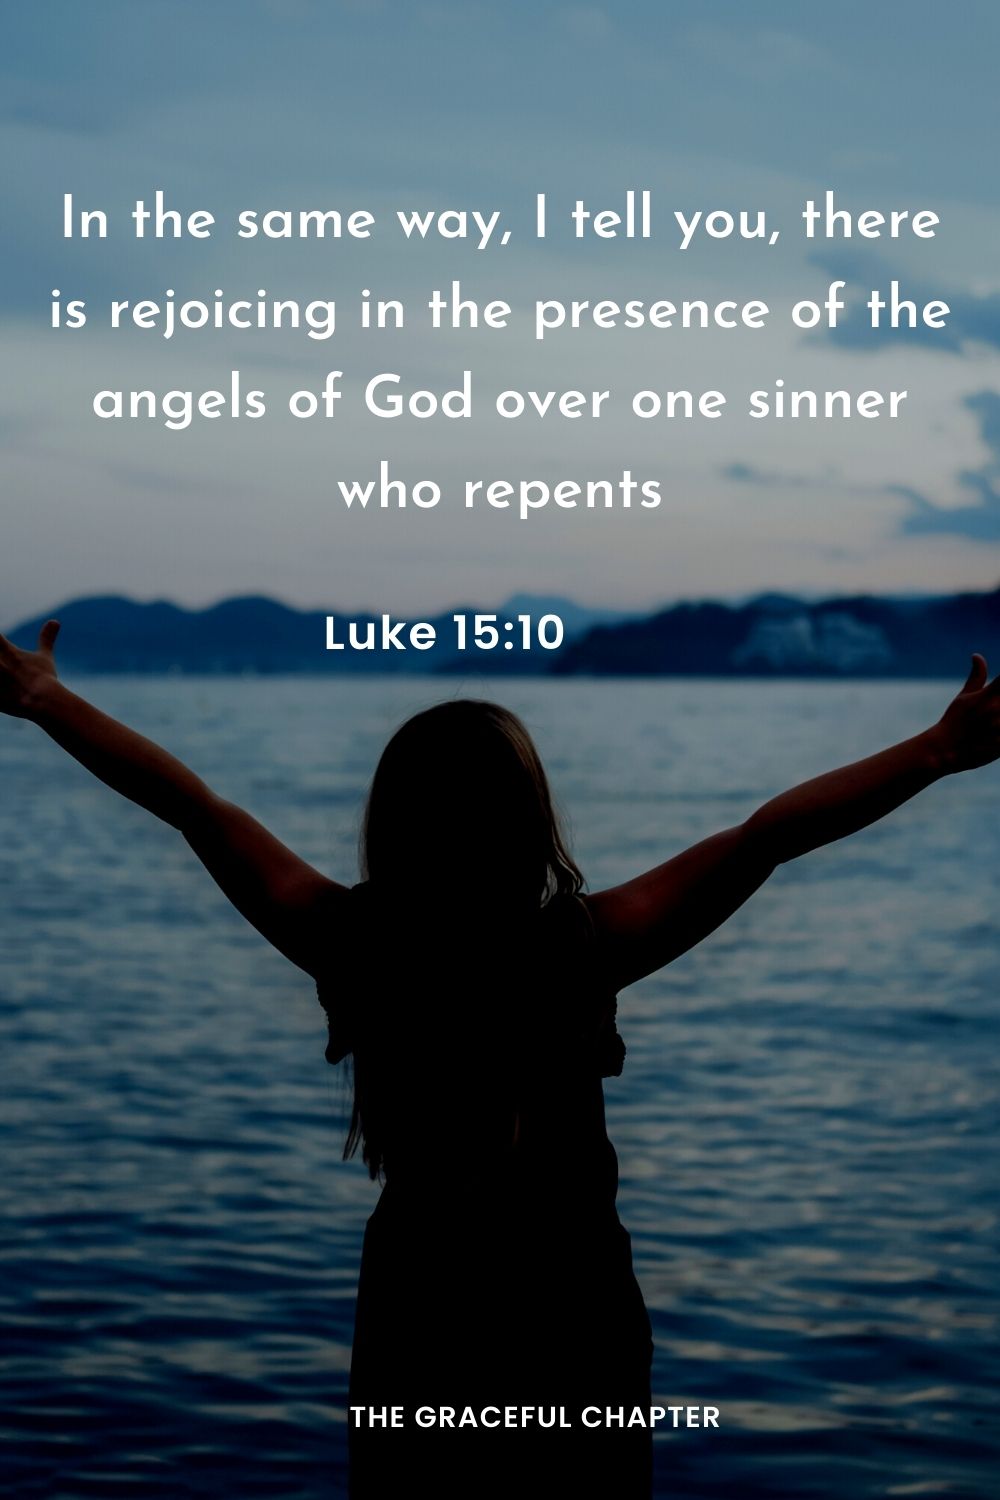 In the same way, I tell you, there is rejoicing in the presence of the angels of God over one sinner who repents